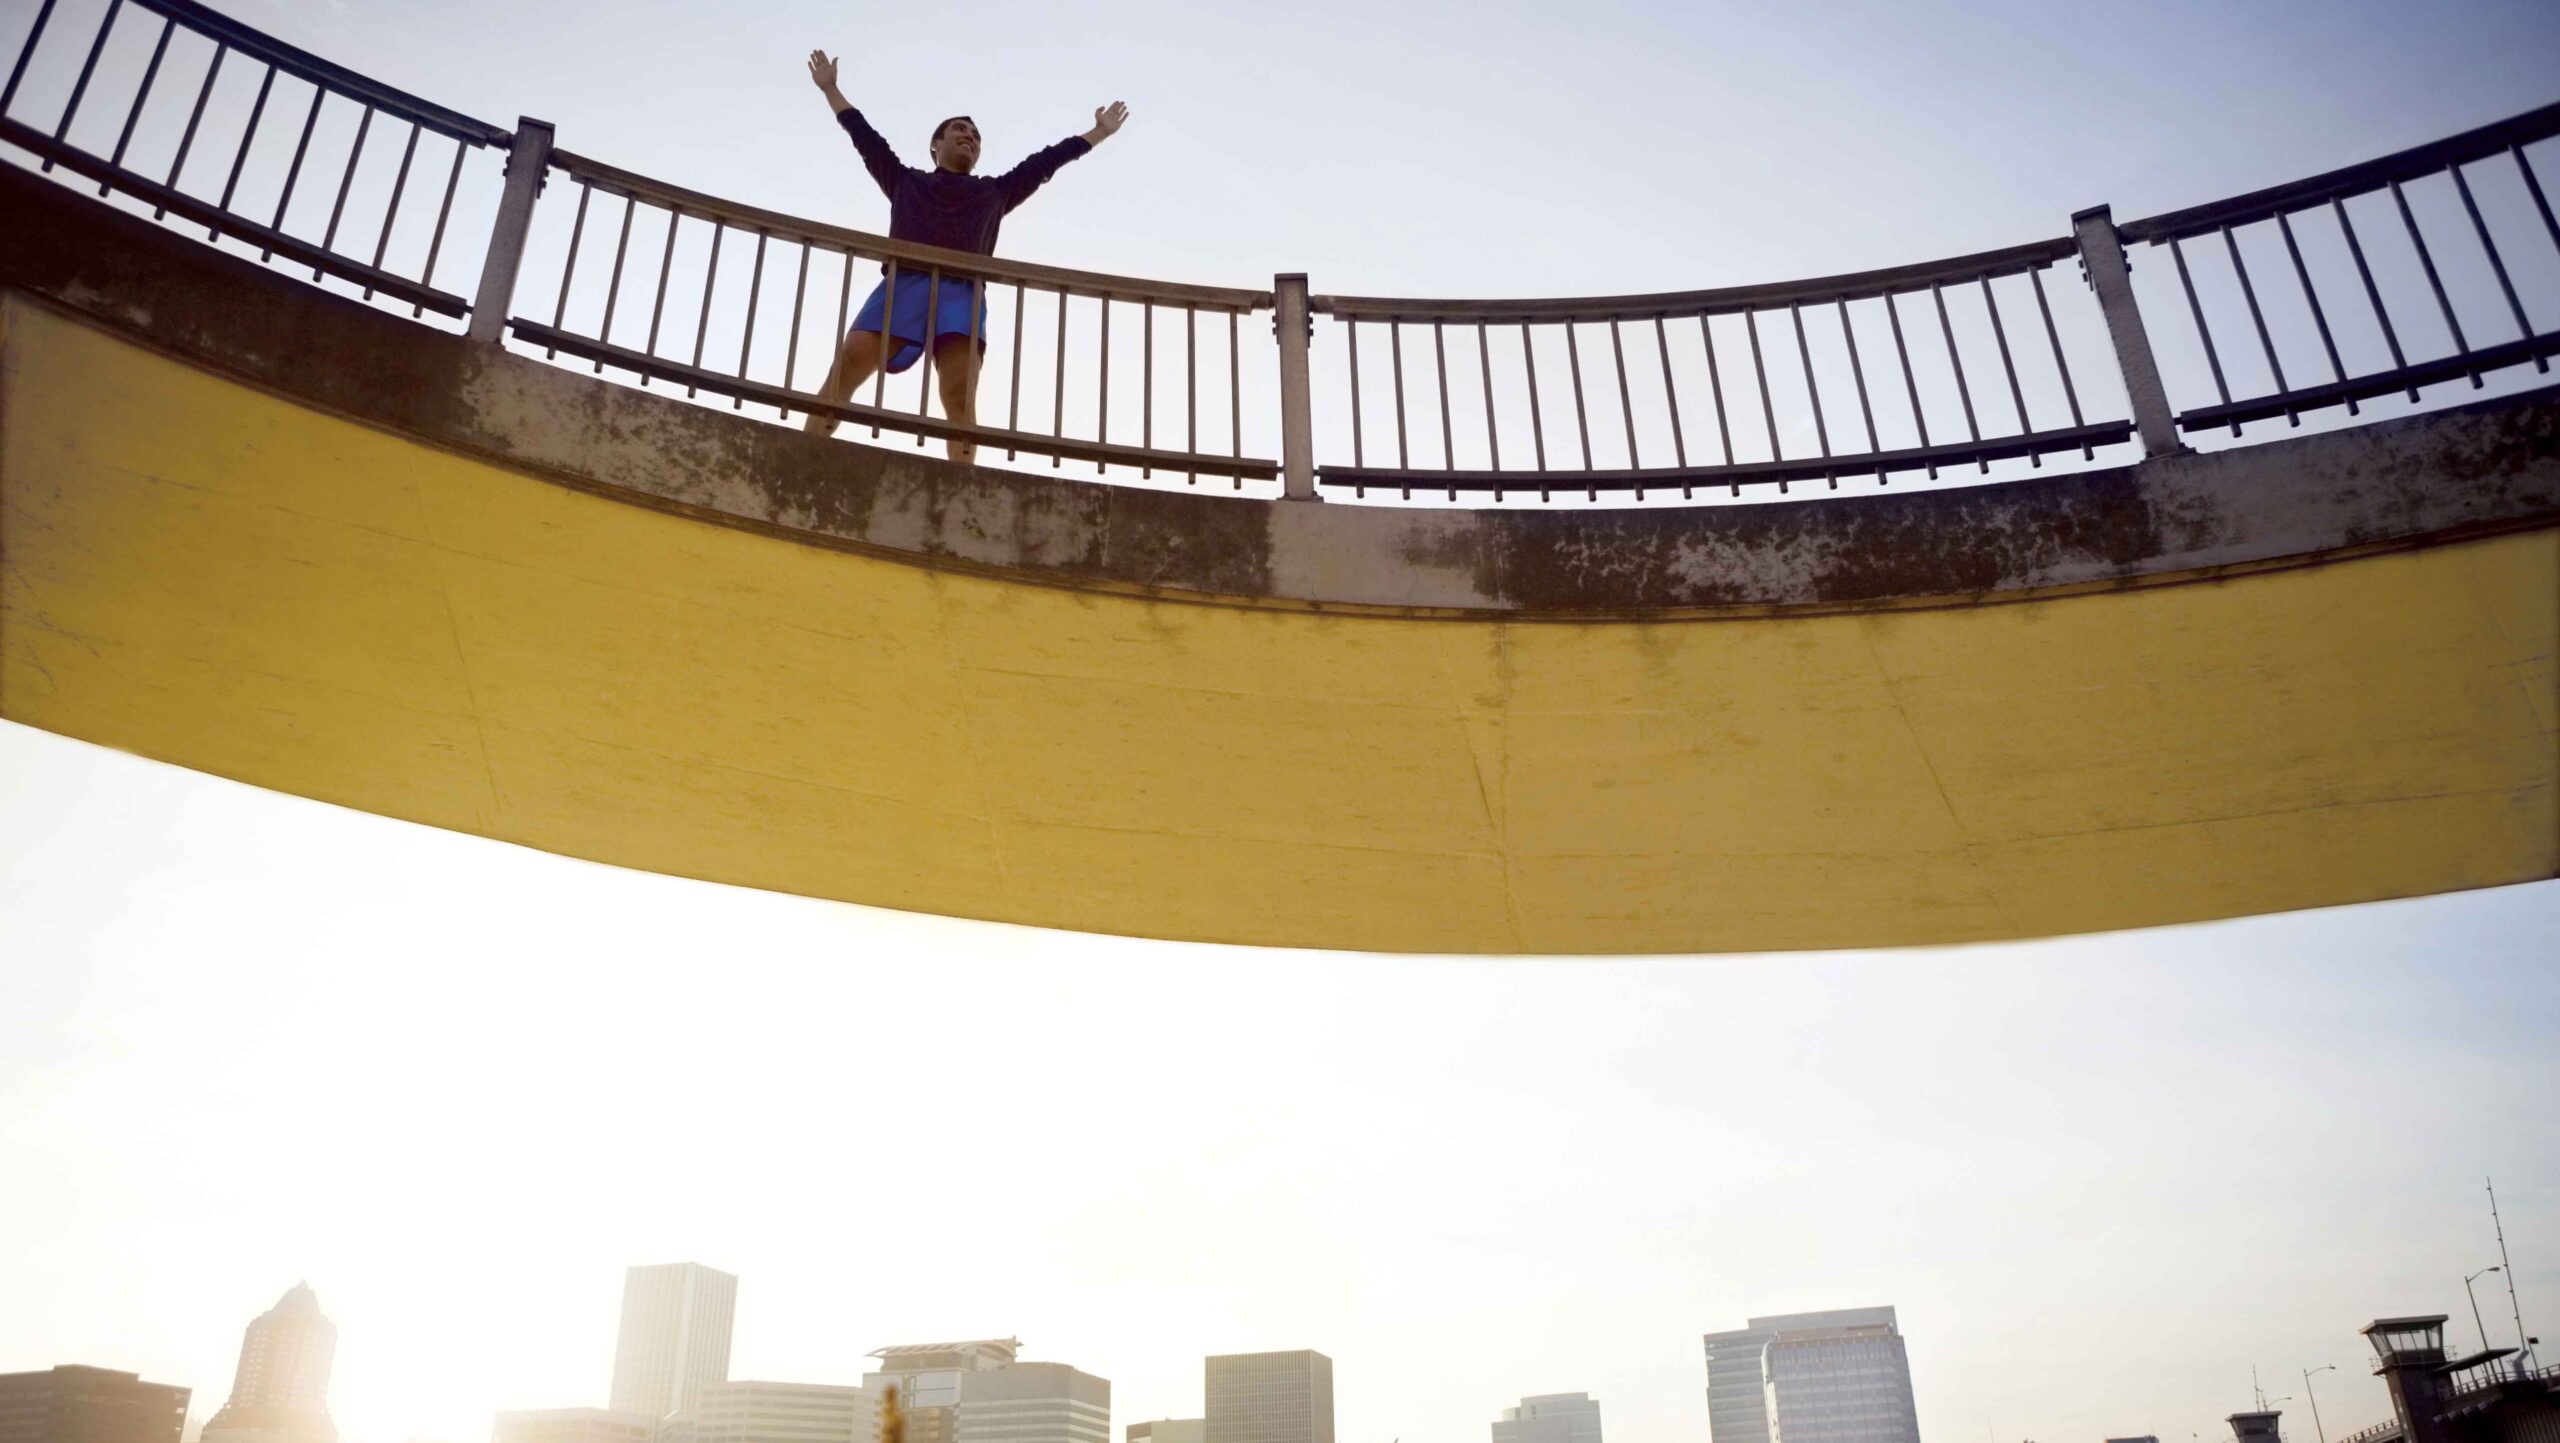 a man stands on top of a bridge with his arms up in a V